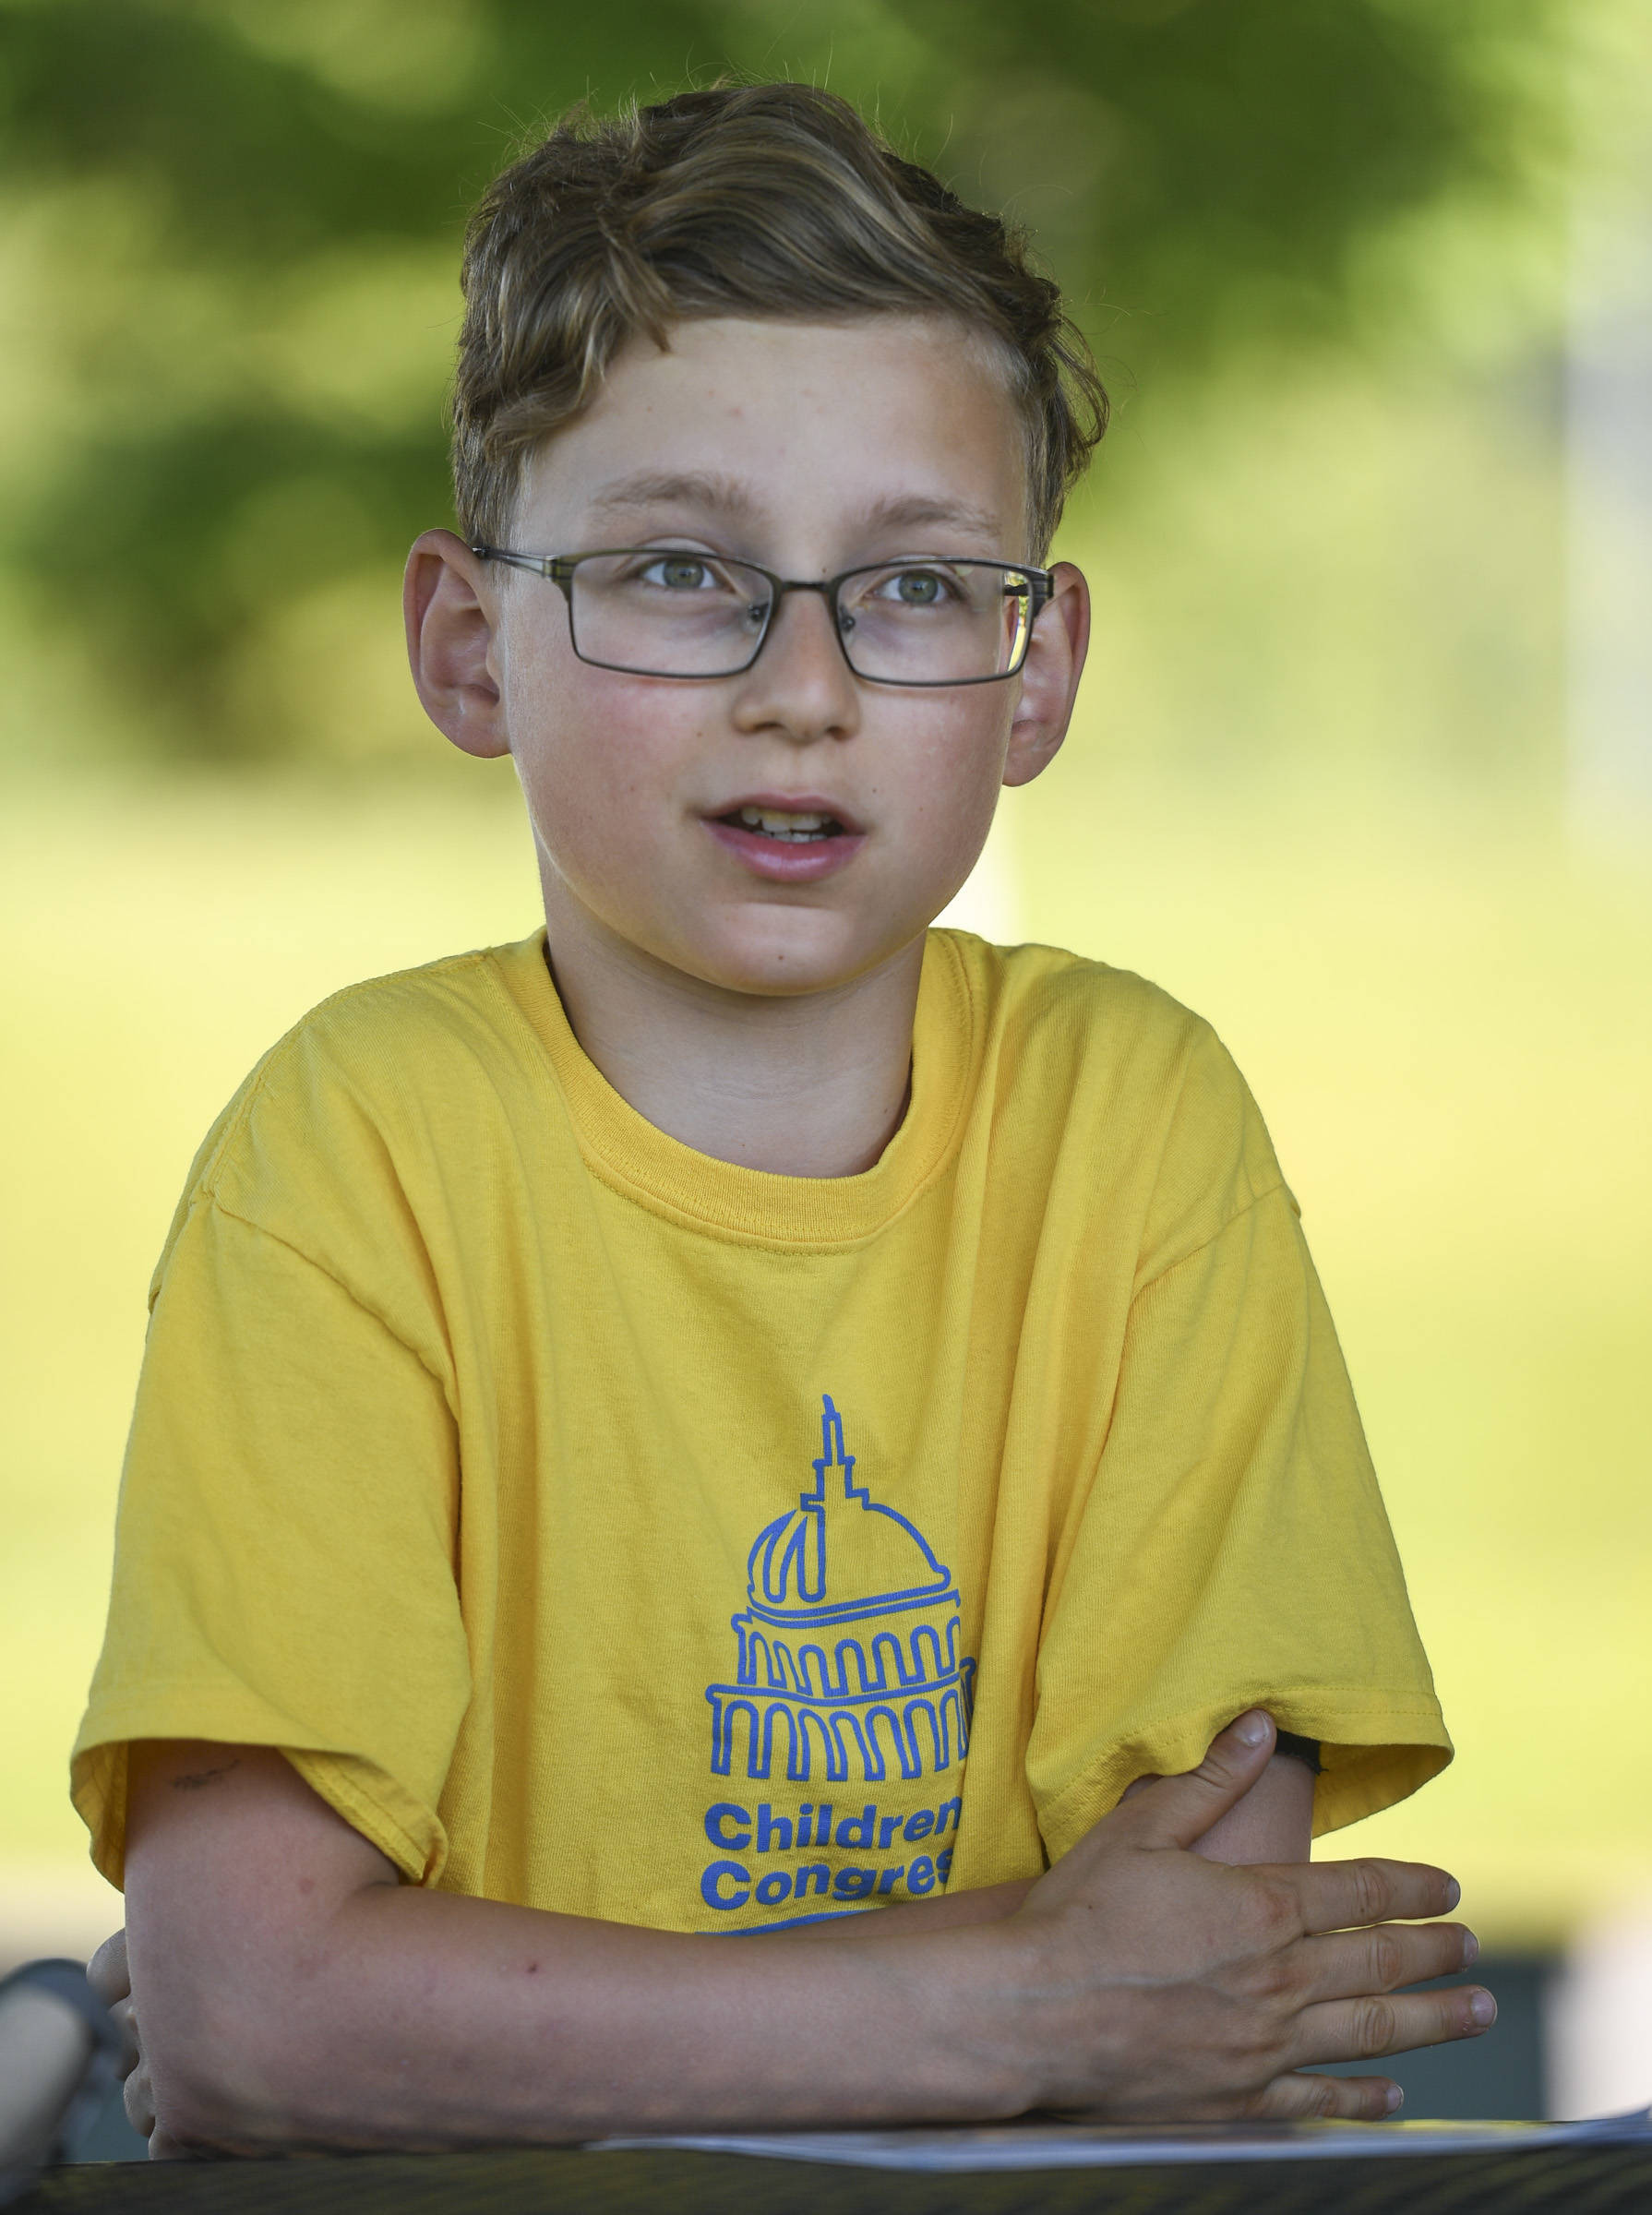 Bruno Malecha, 12, speaks about living with Type 1 diabetes on Tuesday, June 25, 2019. Bruno will be traveling to Washington, D.C., this summer to lobby members of Congress to support diabetes research. (Michael Penn | Juneau Empire)